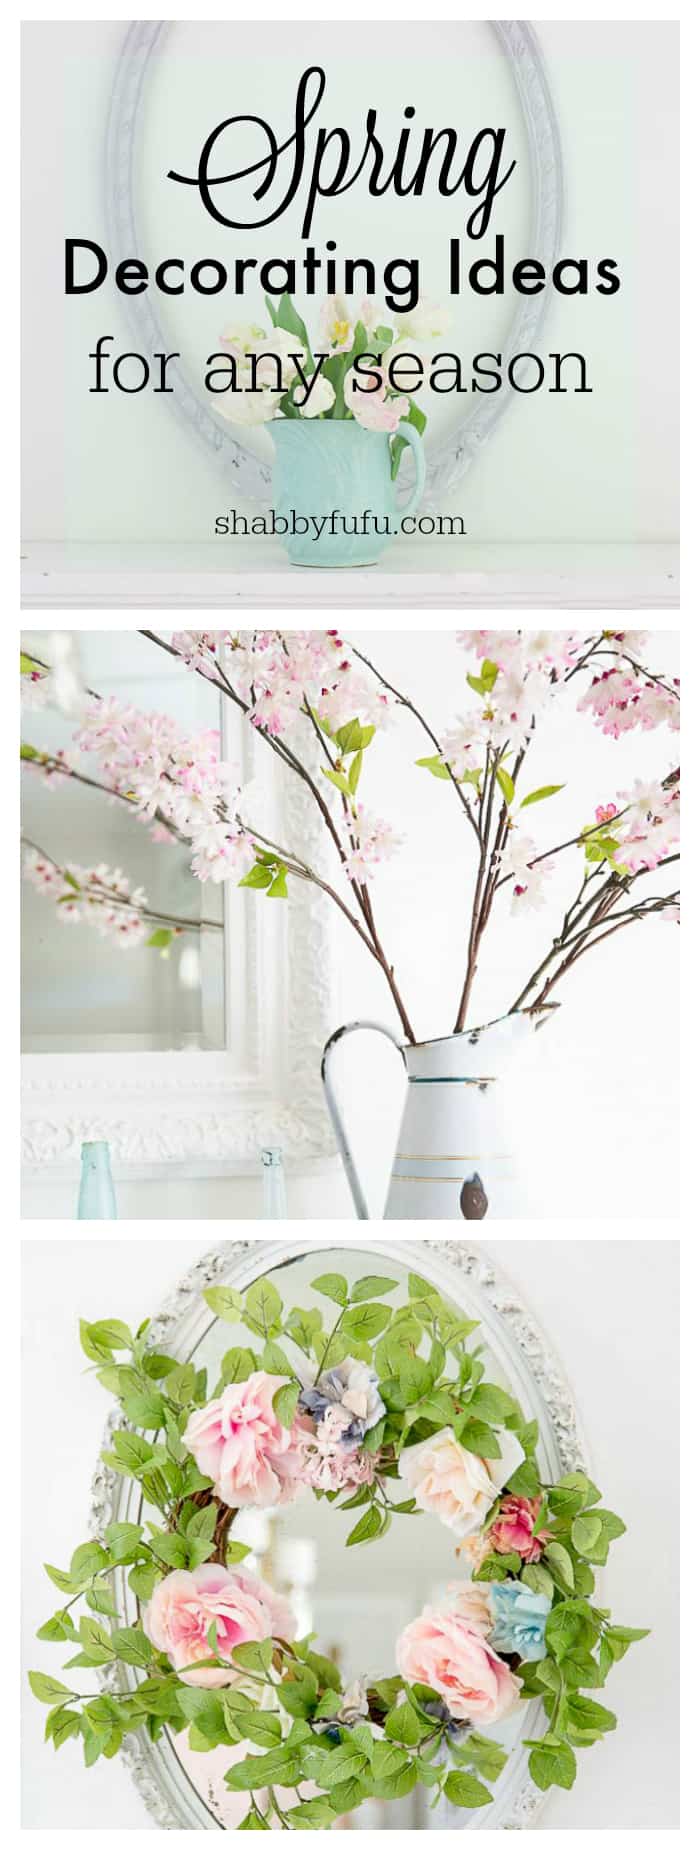 Spring decorating ideas for any season. We love to use faux florals and spring infused color with vintage pottery, pillows, throws and succulents. More on the blog at shabbyfufu.com #springdecorating #springdecor #designideas